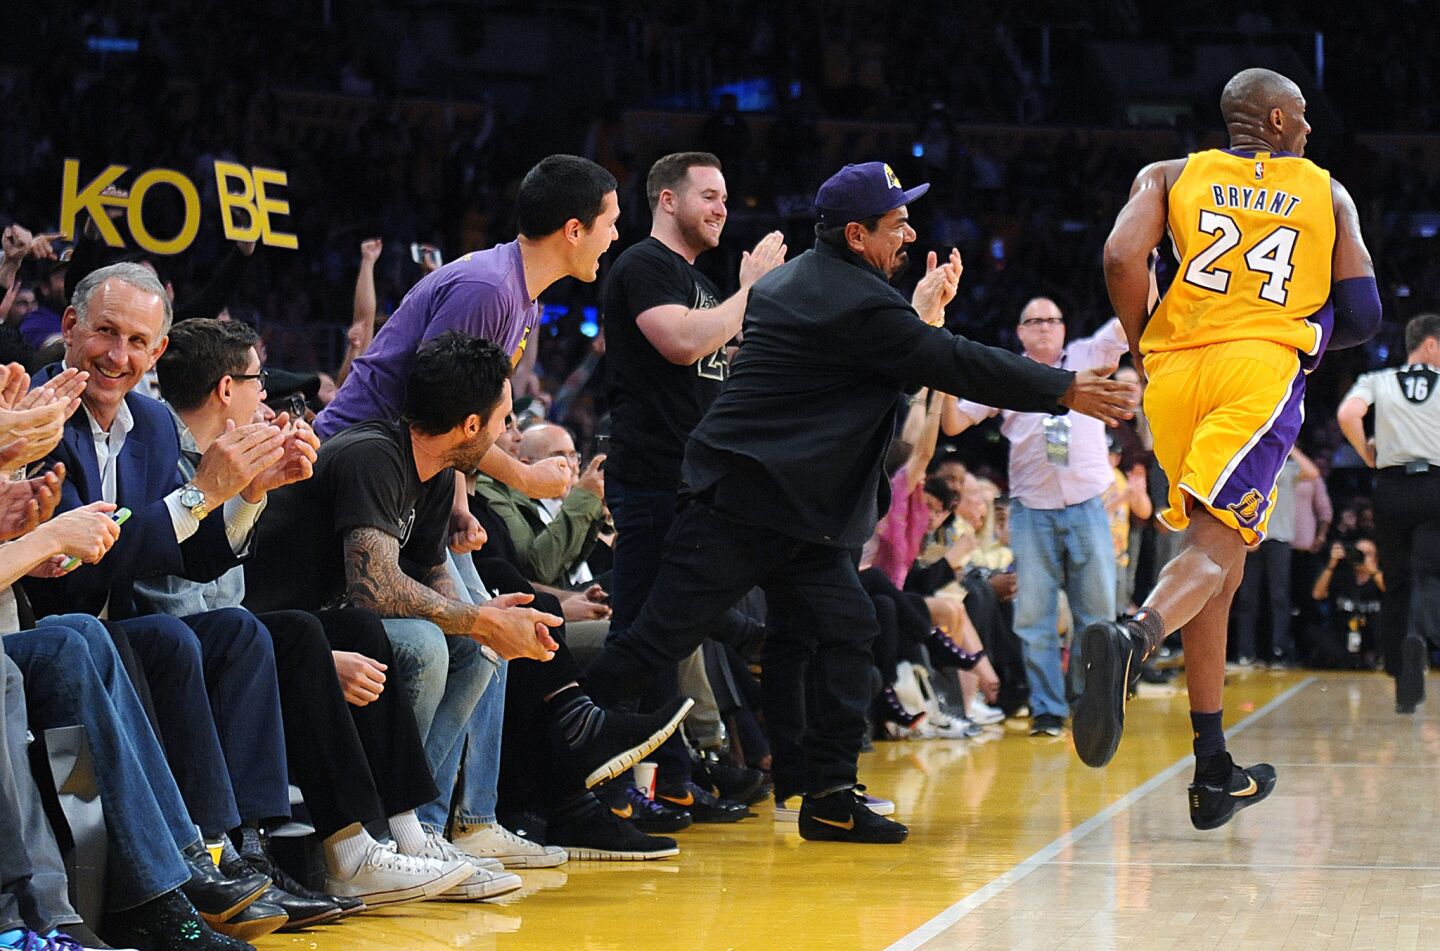 Kobe Bryant gets a slap from comedian George Lopez after making a three-pointer in his final game.